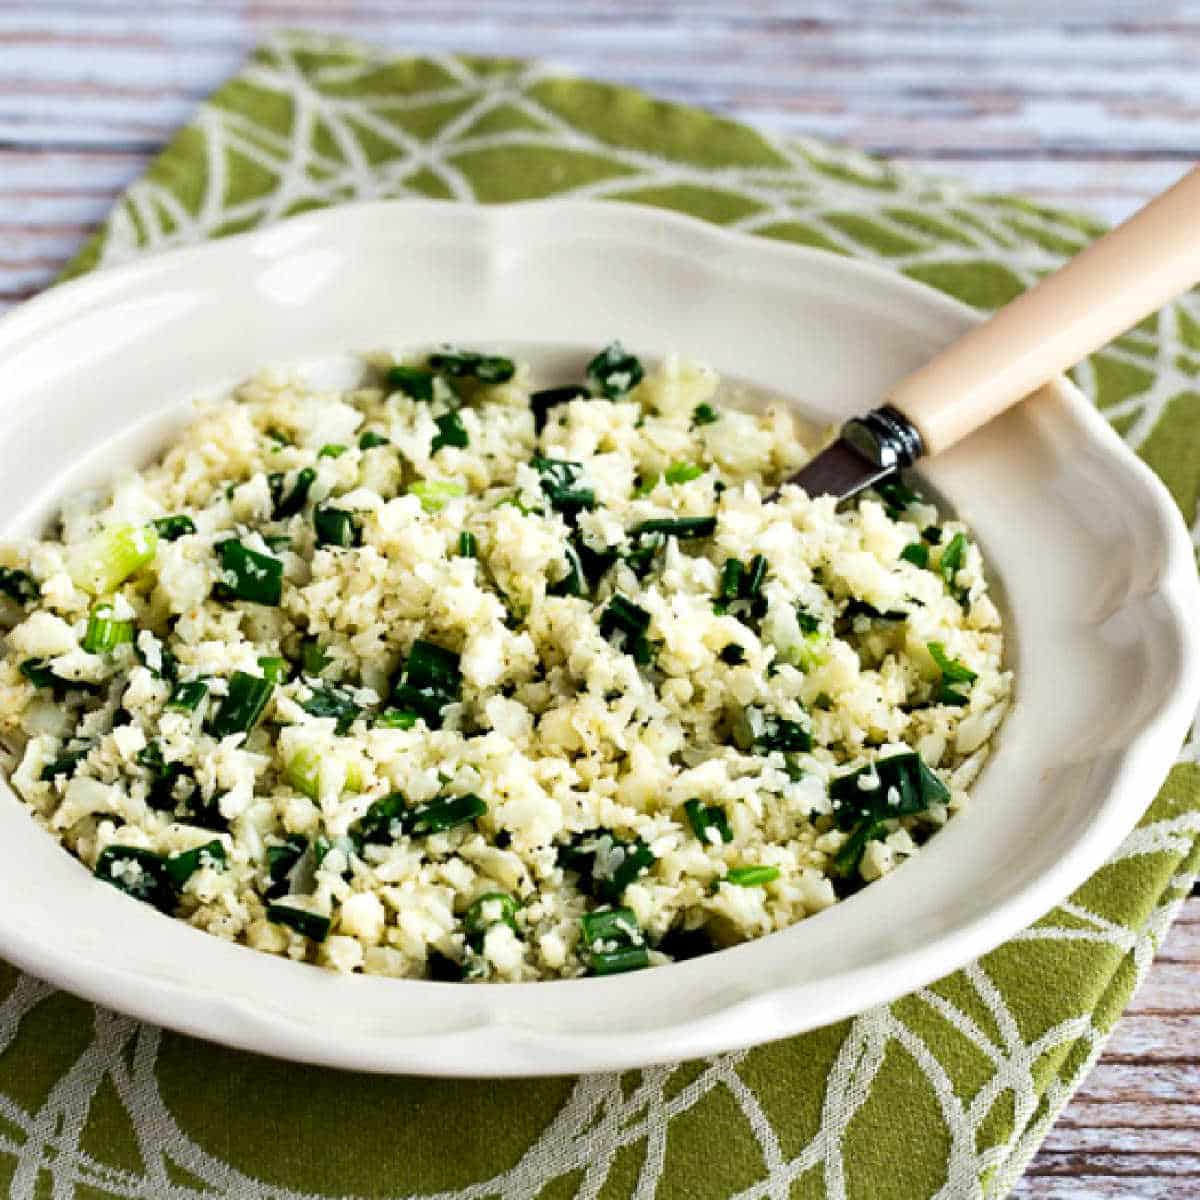 Square image for Easy Cauliflower Rice Recipe shown in serving bowl with spoon, or green-white napkin.